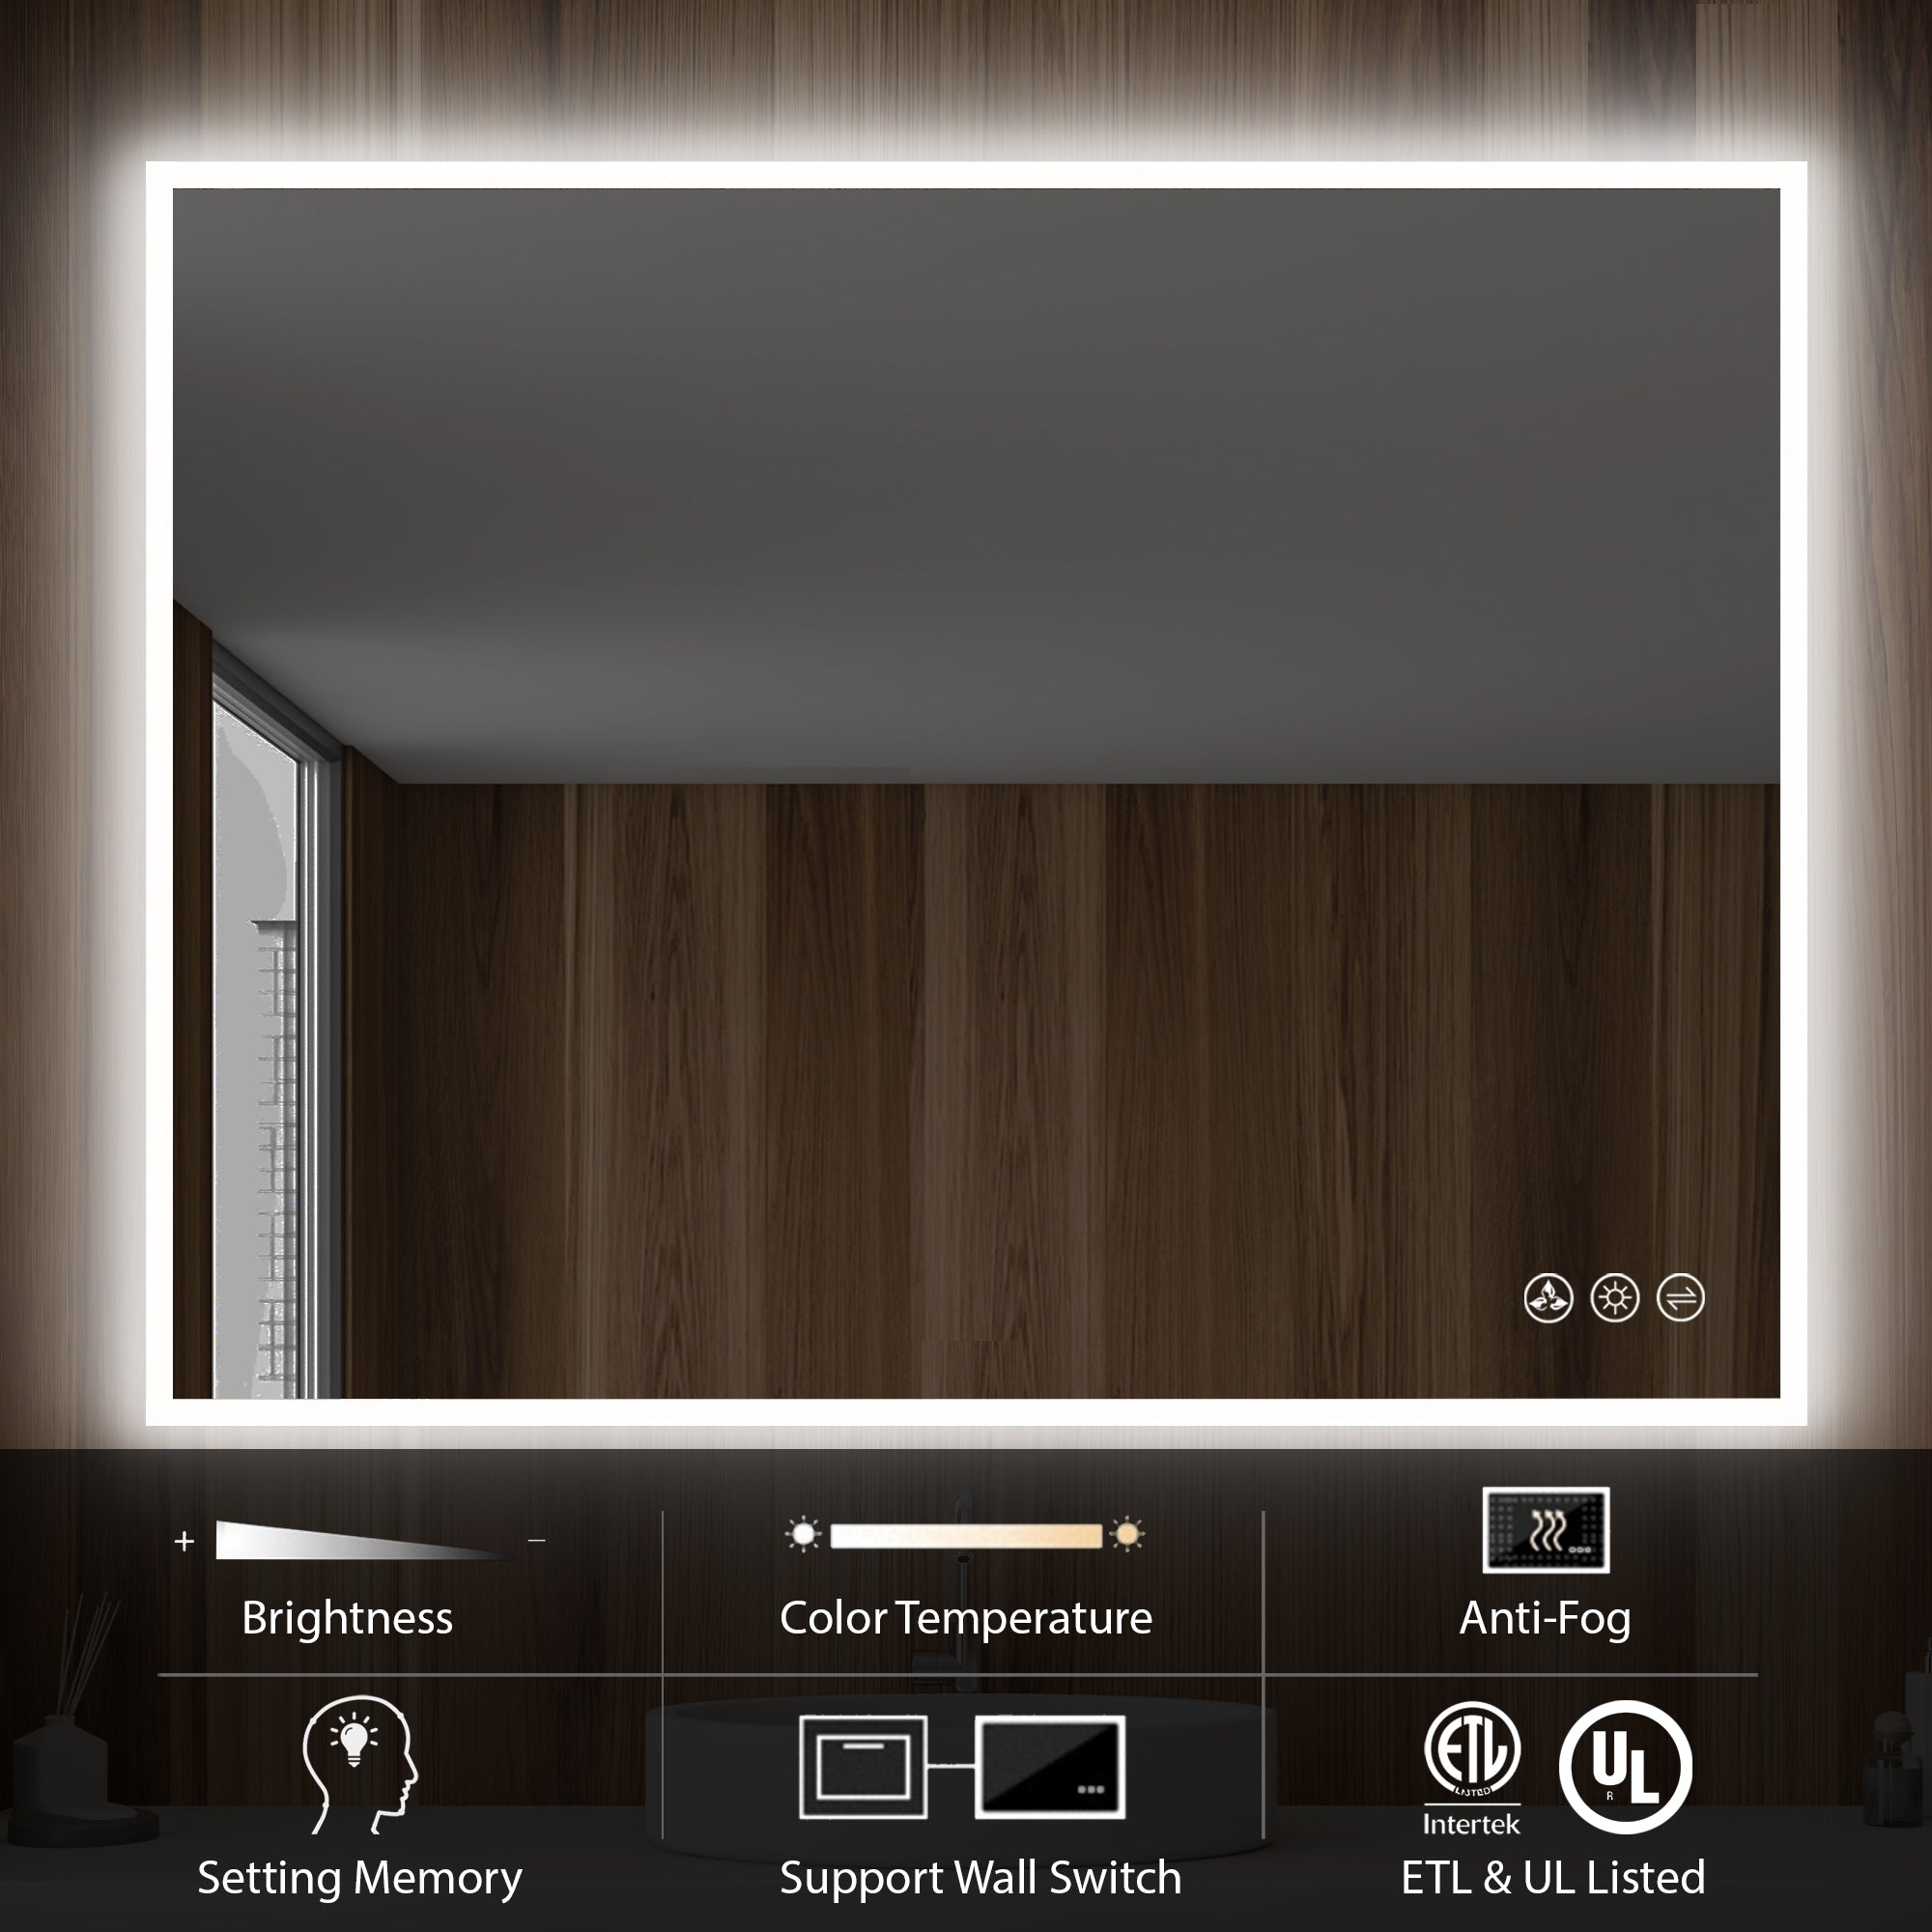 Beta 48″ by 36″ LED Mirror with Frosted Sides Vanity Plus